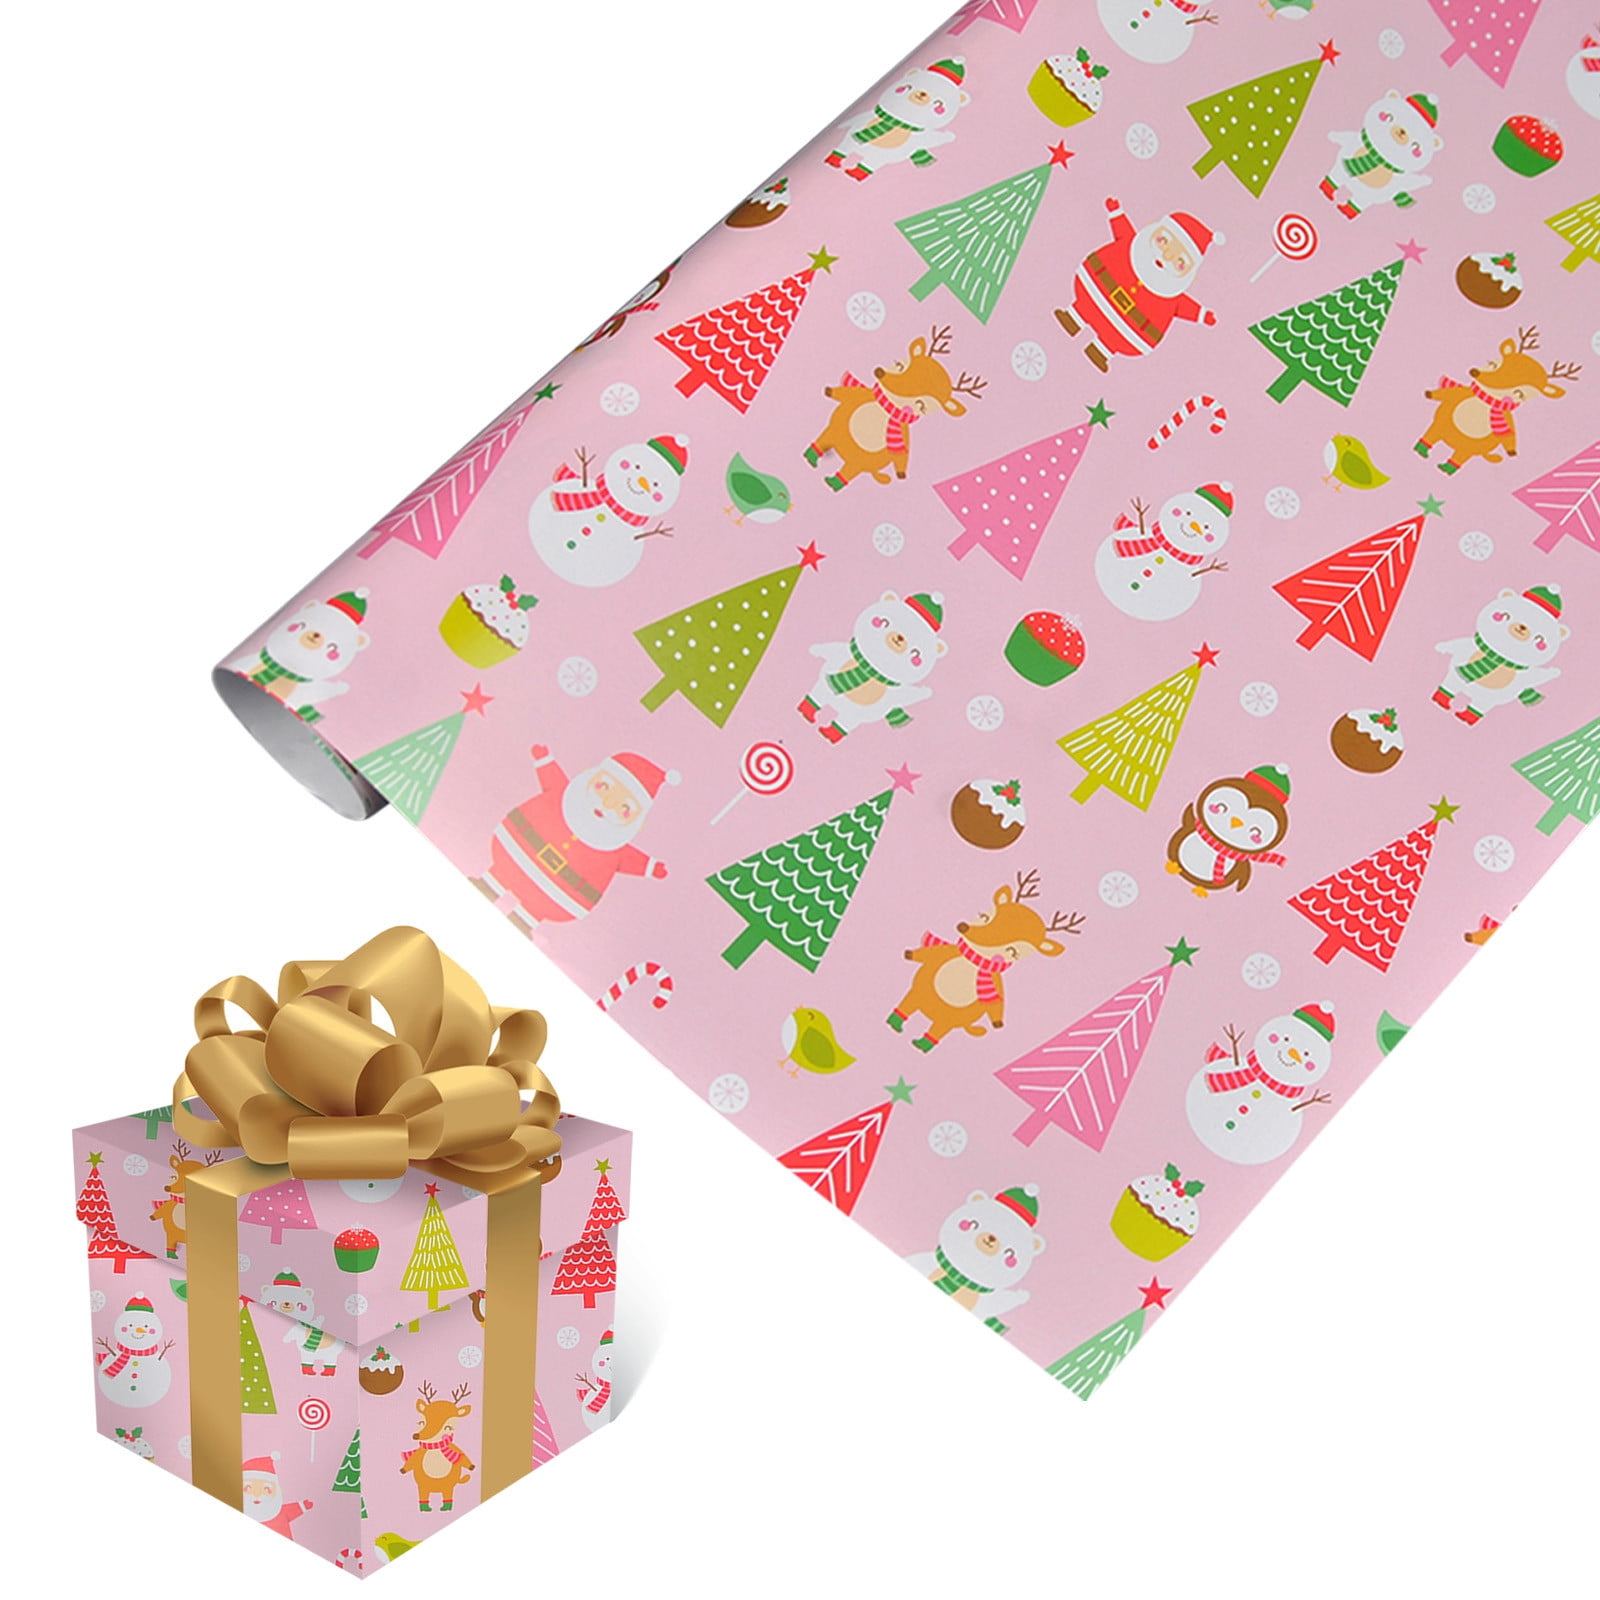 50*70cm Christmas Gift Wrapping Paper Shirt Shoes Packaging Paper Roll  Holiday Gift Wrap Party Decoration Упаковочная Бумага *02 - AliExpress